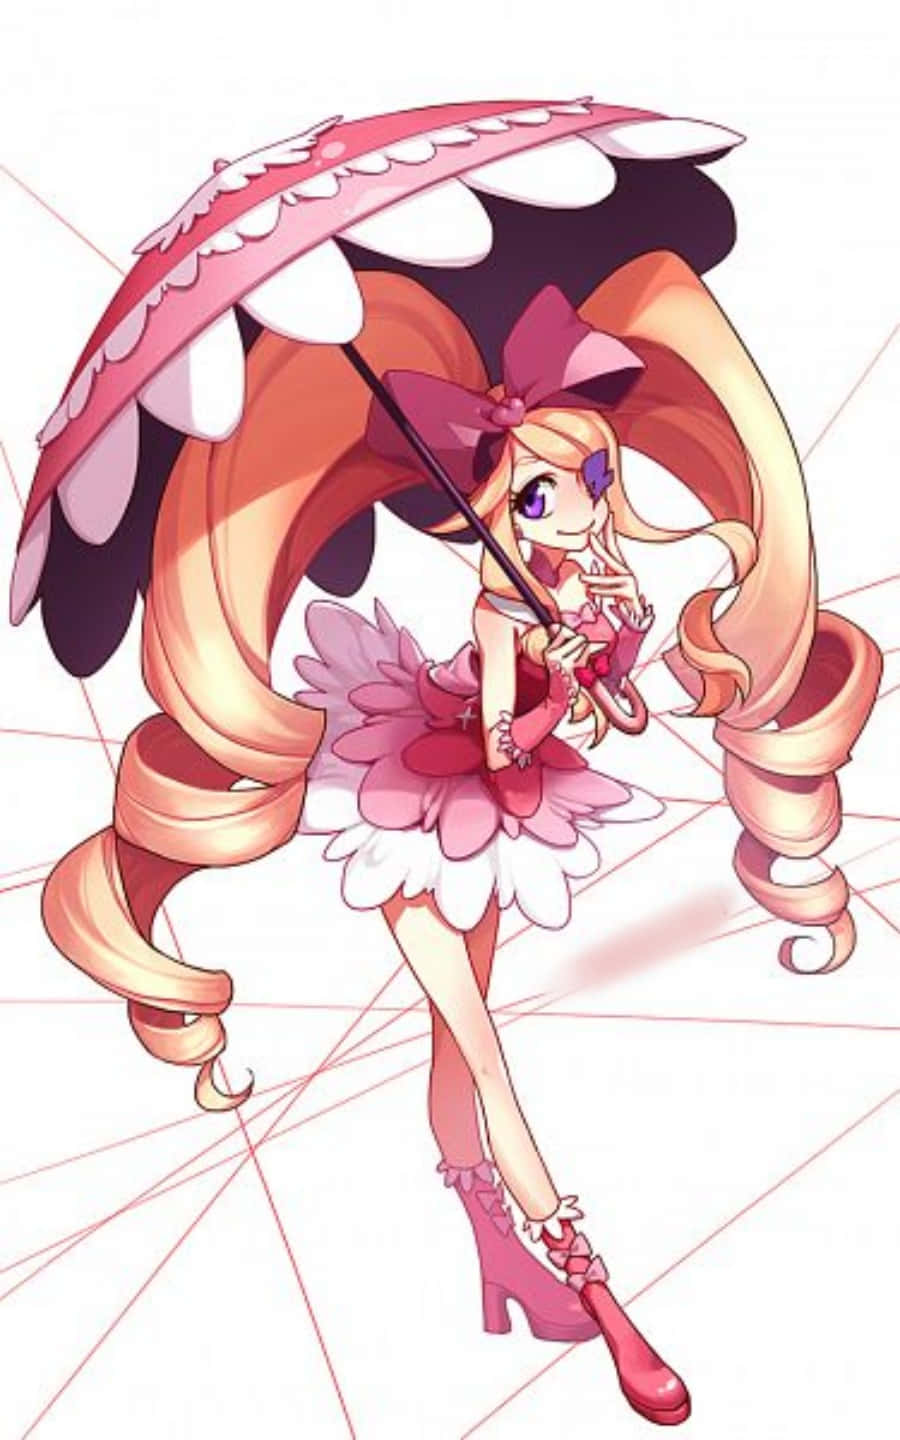 Nui Harime striking a pose in her signature outfit Wallpaper